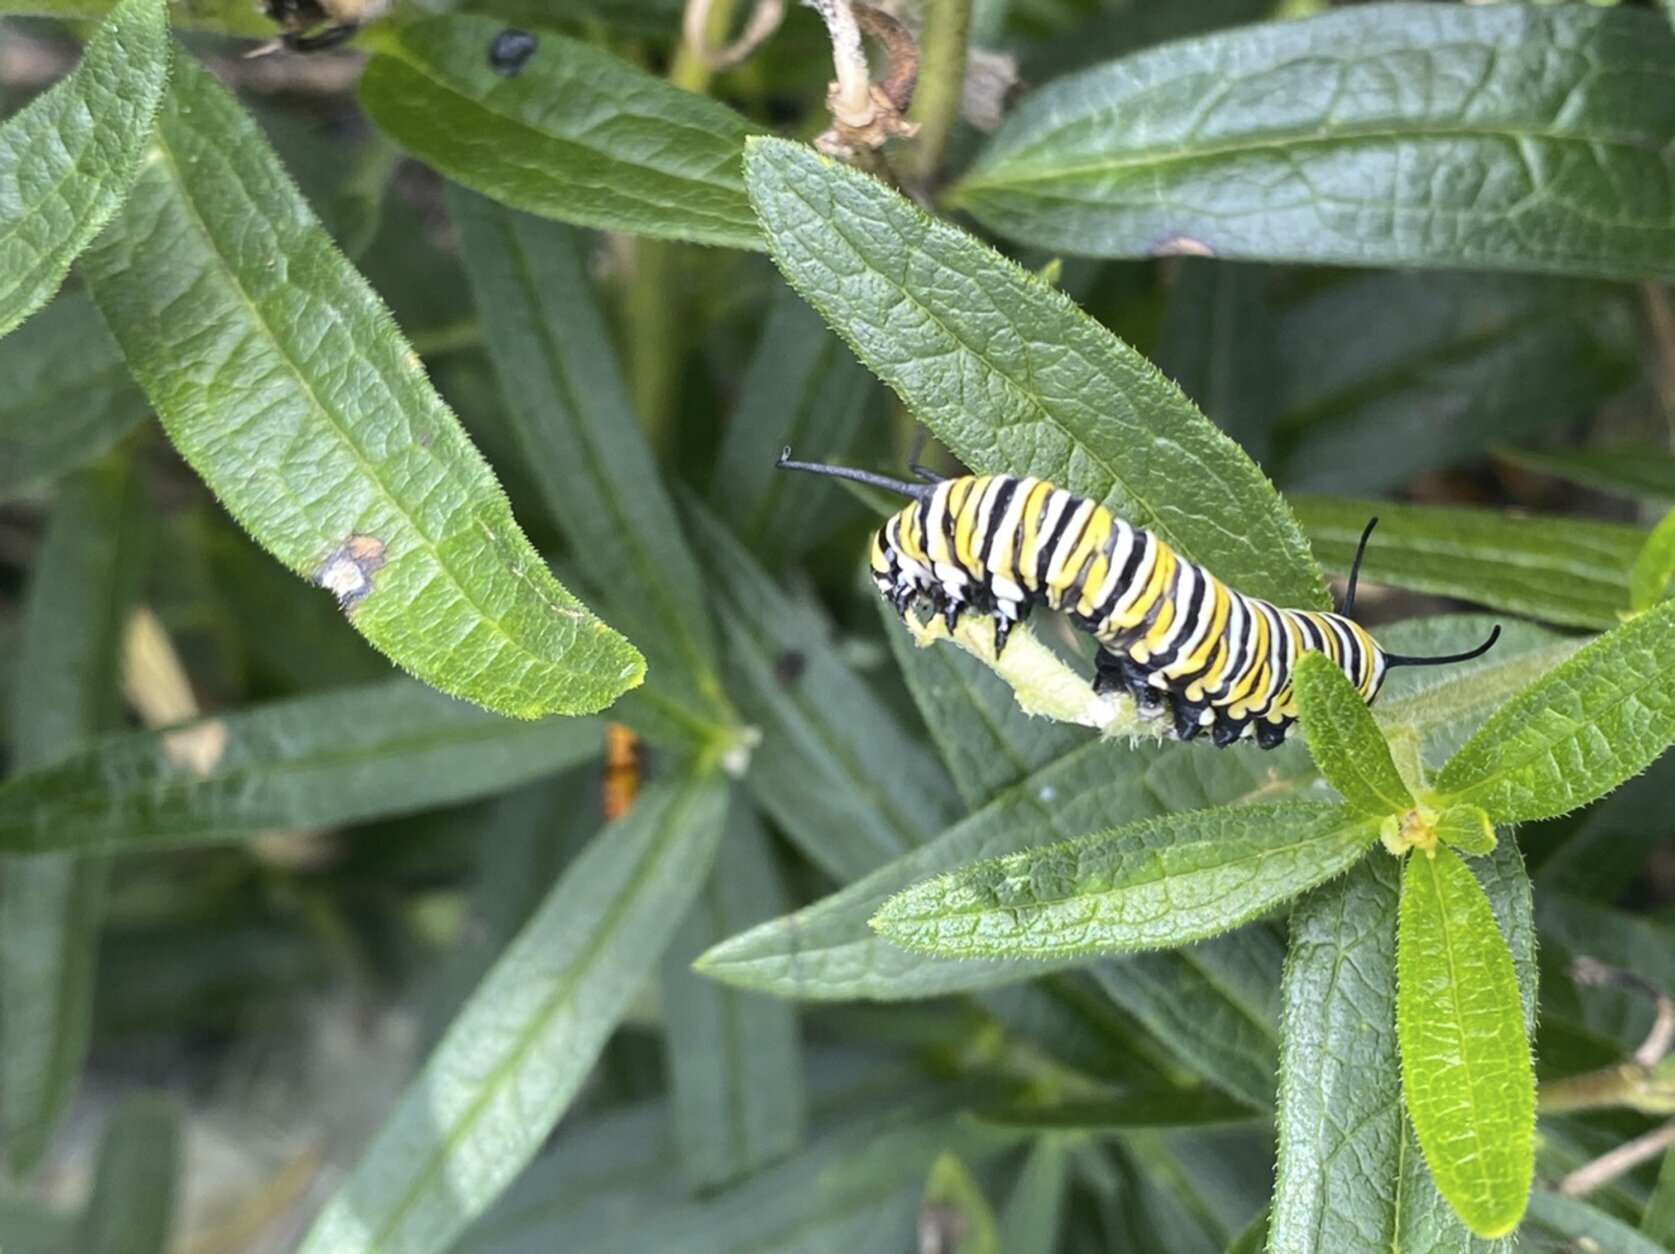 Monarch butterflies are now an endangered species. Here's how